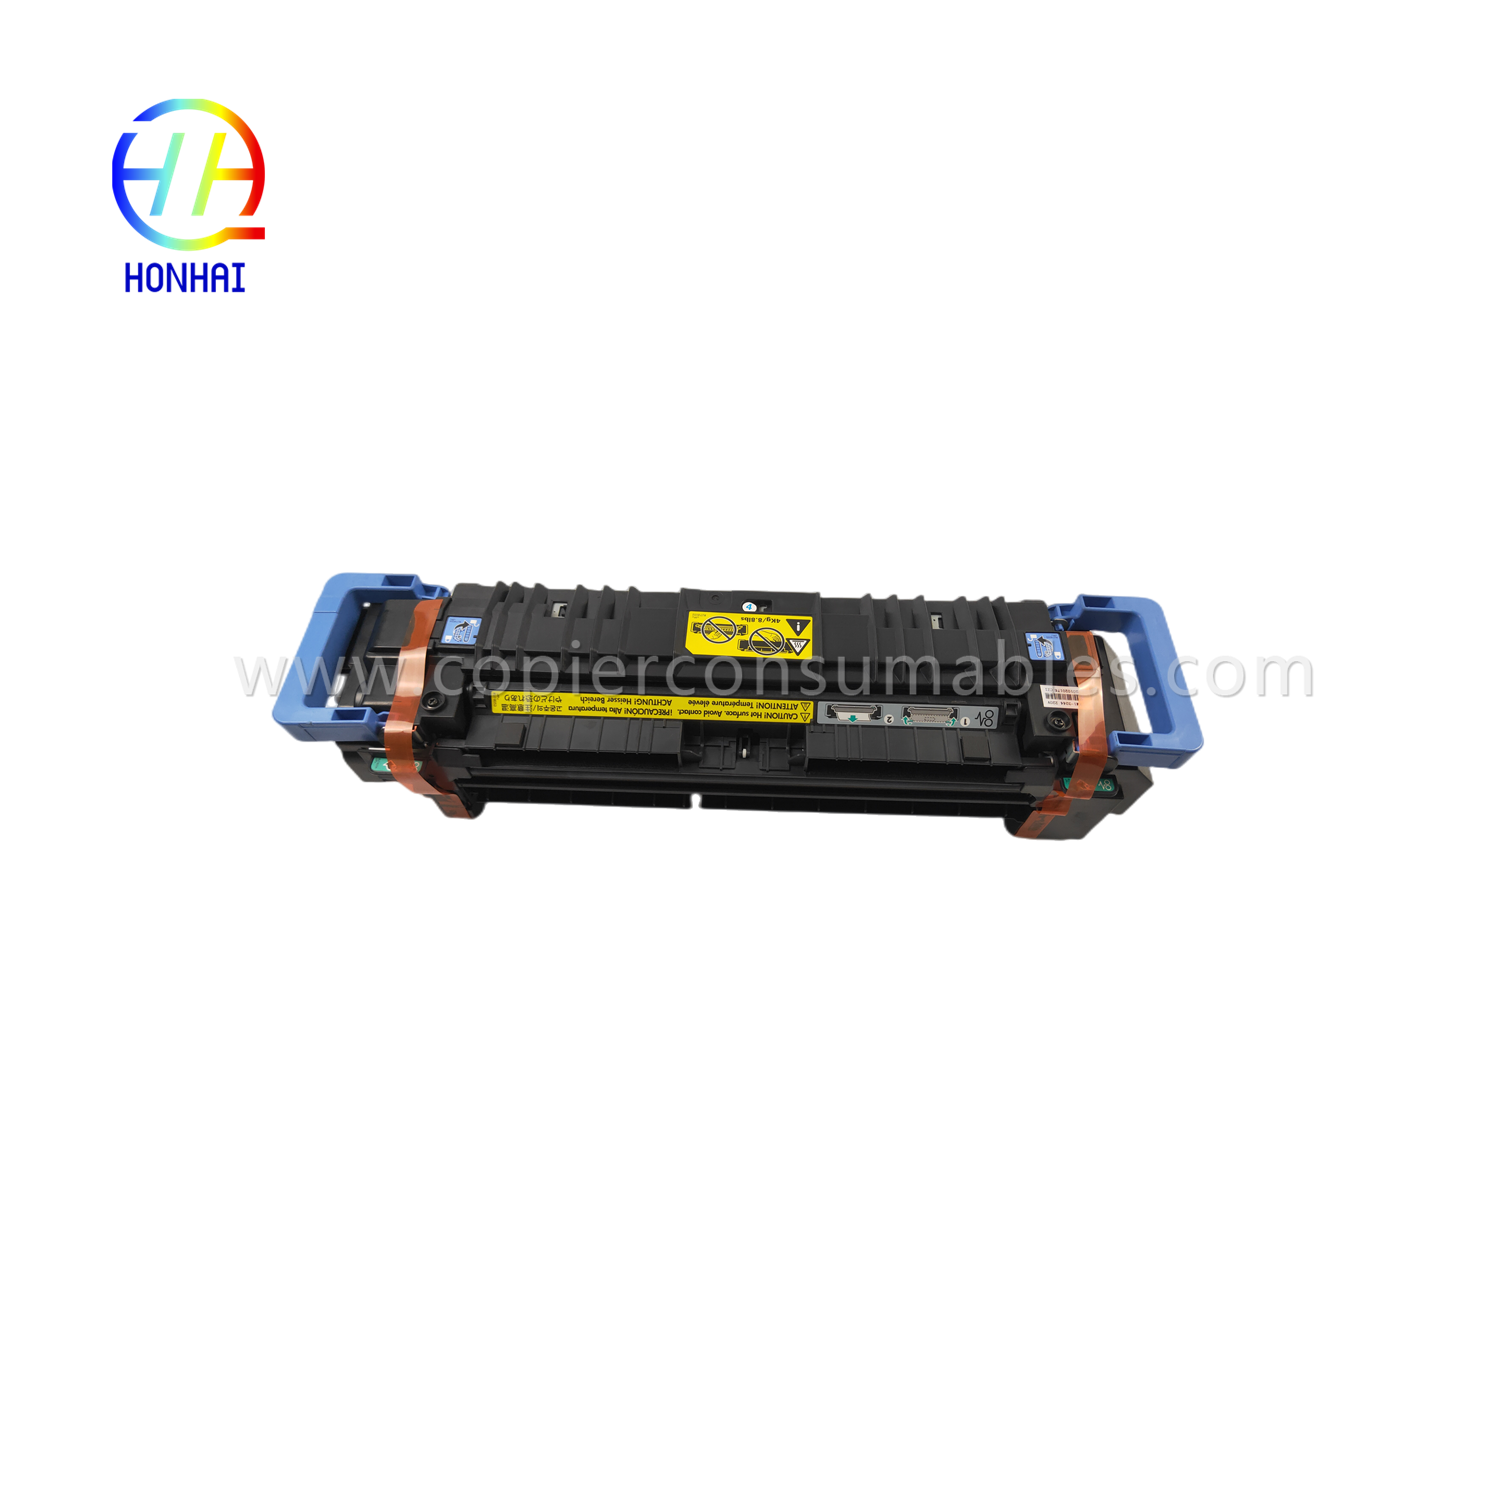 https://www.copierconsumables.com/fuser-assembly-unit-for-hp-m855-m880-m855dn-m855xh-m880z-m880z-c1n54-67901-c1n58-67901-fusing-heating-fixing-assy-